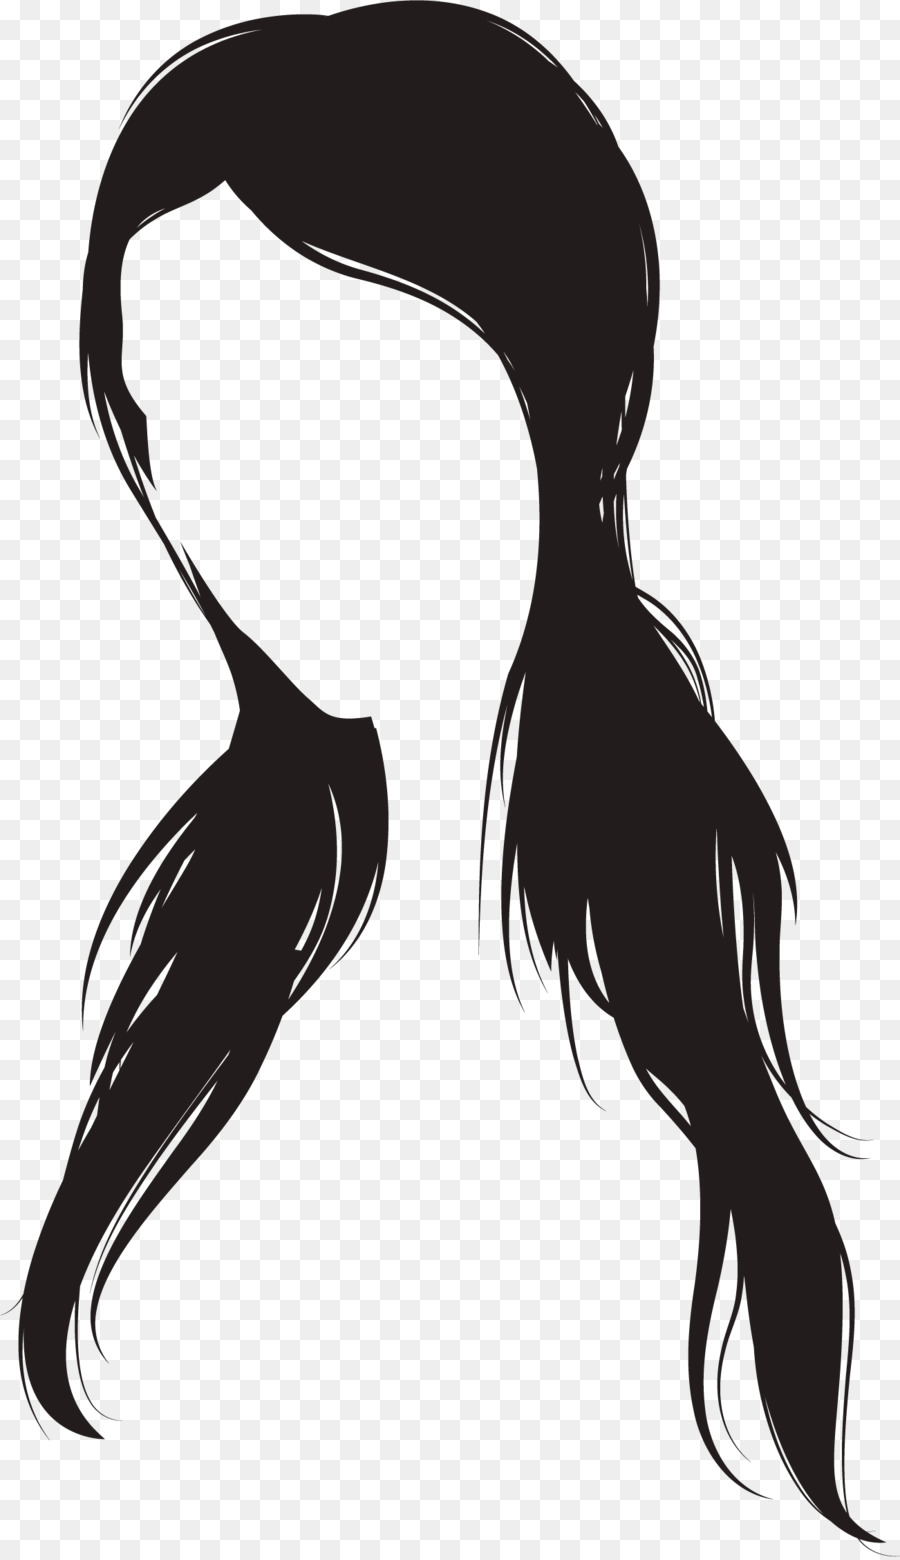 Free Hair Silhouette Free Vector, Download Free Clip Art, Free Clip Art